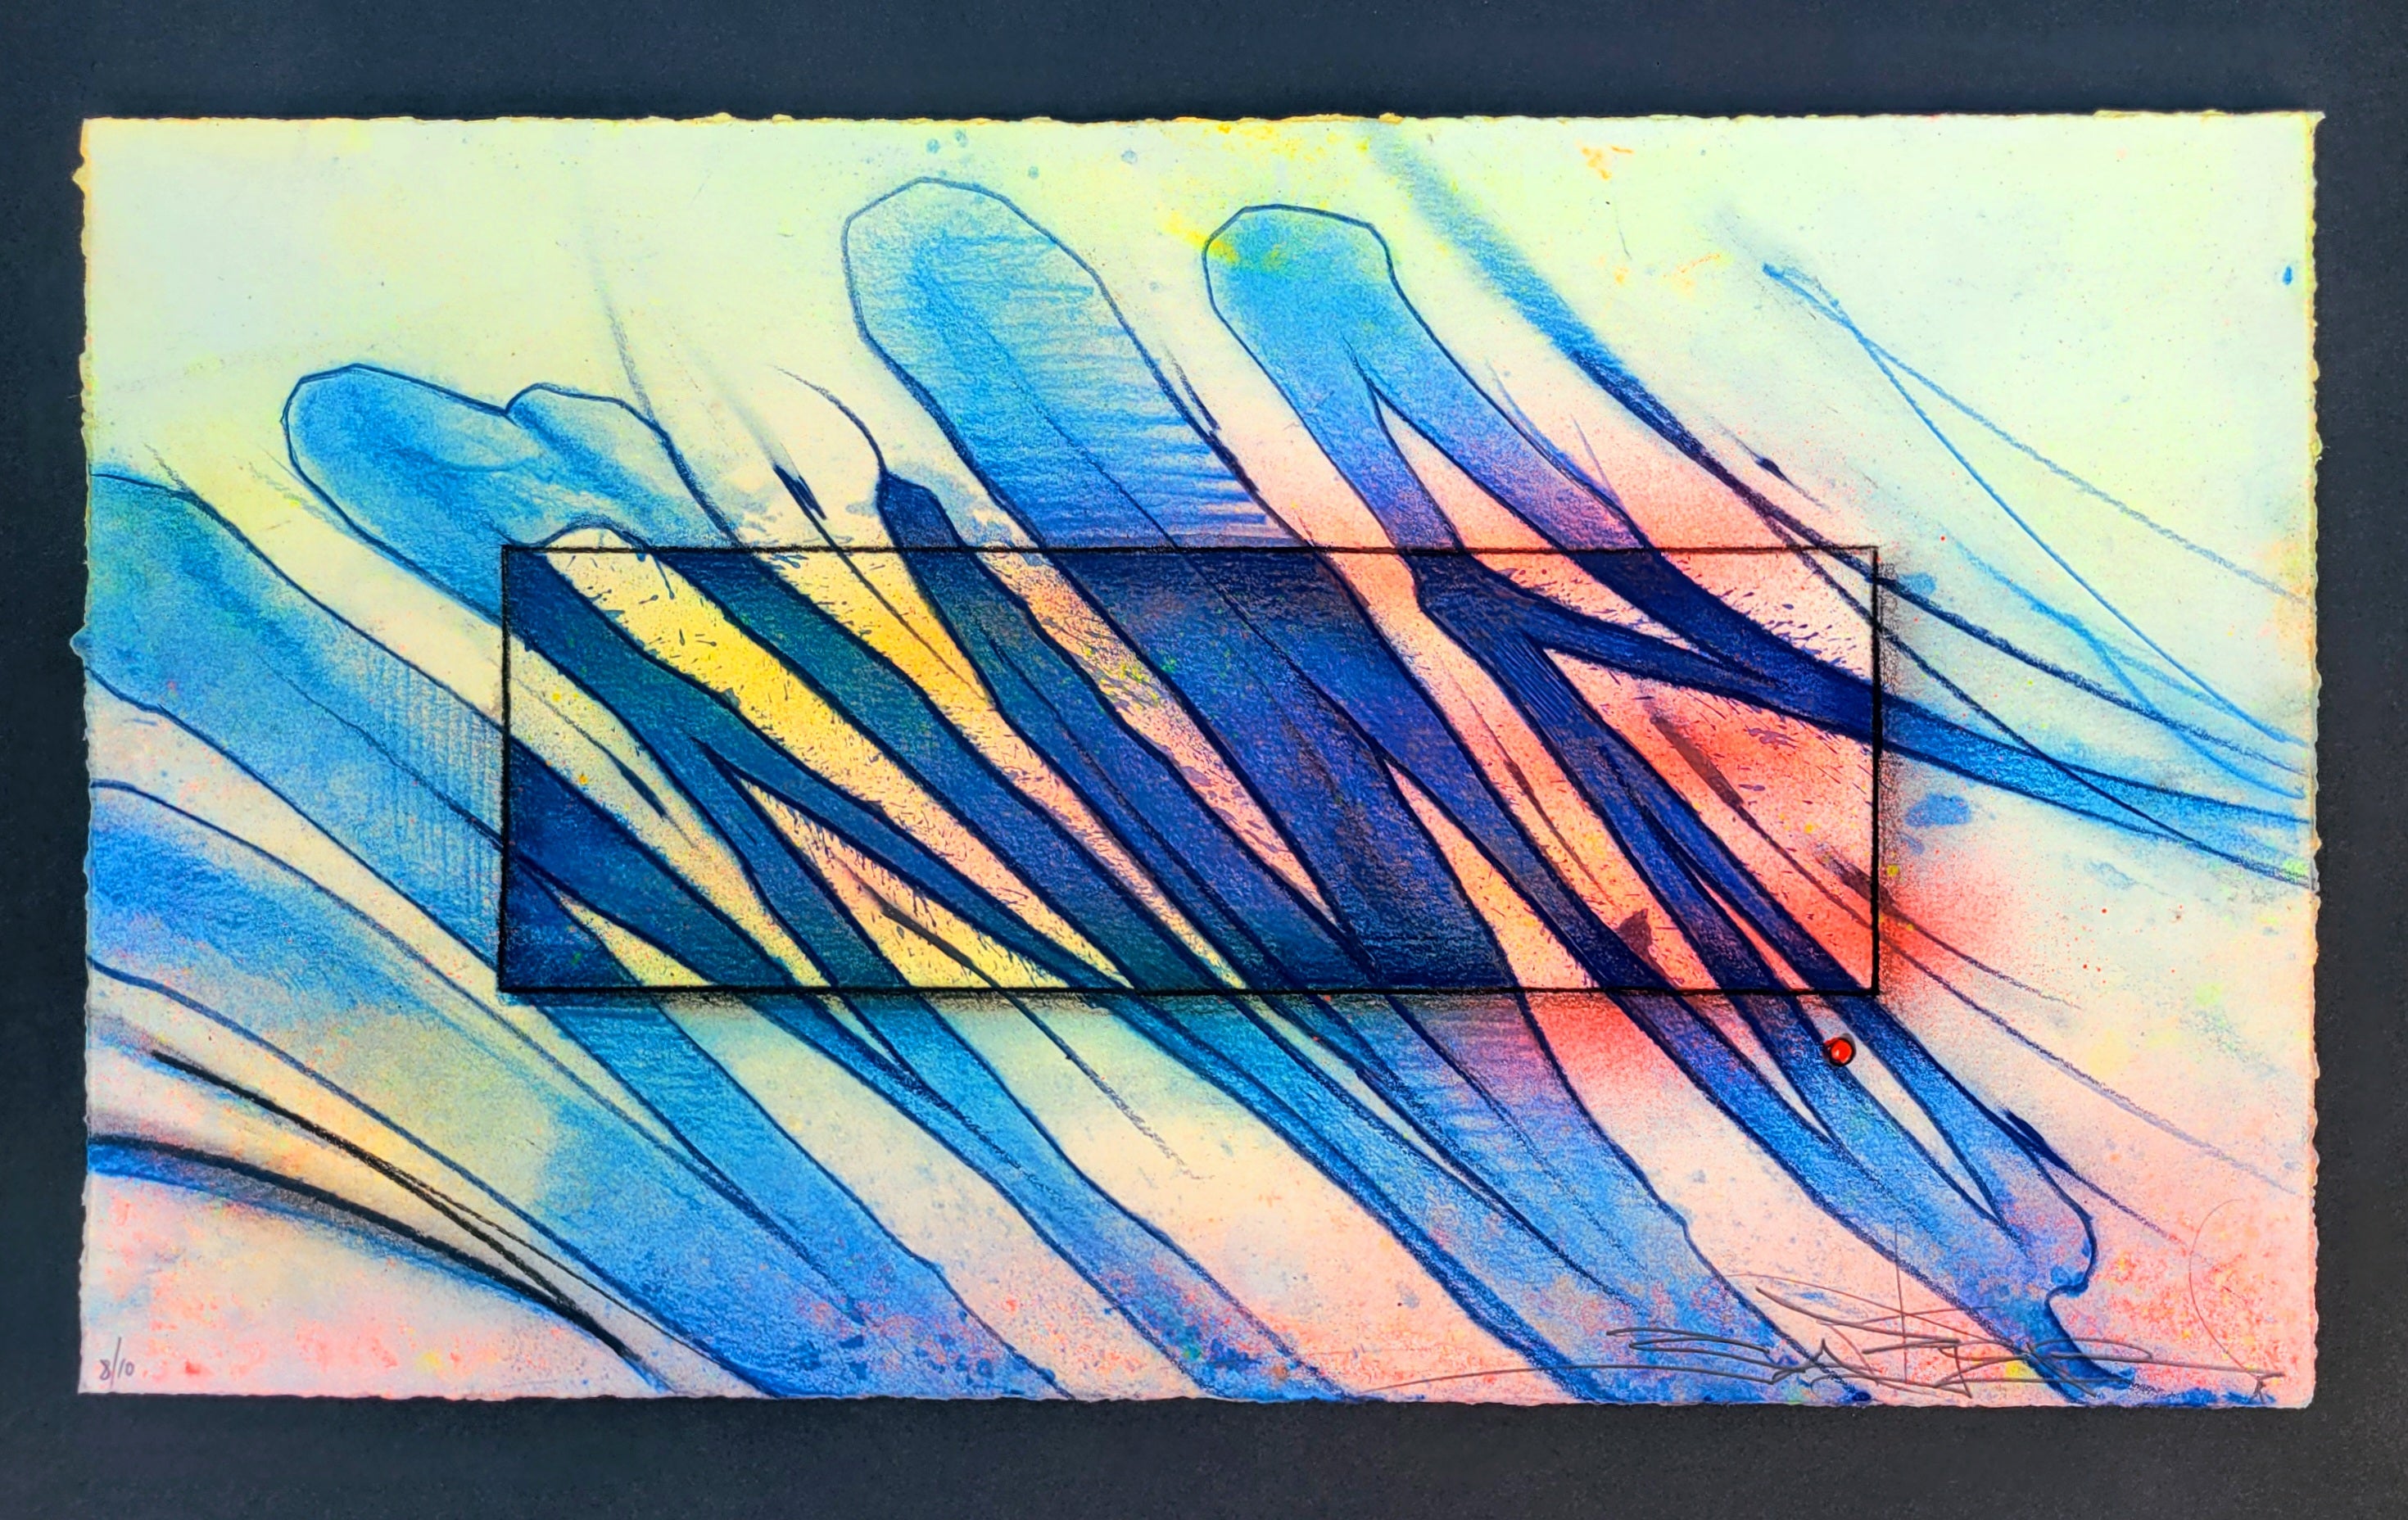 Blue × Spectrum Whips Paper Series